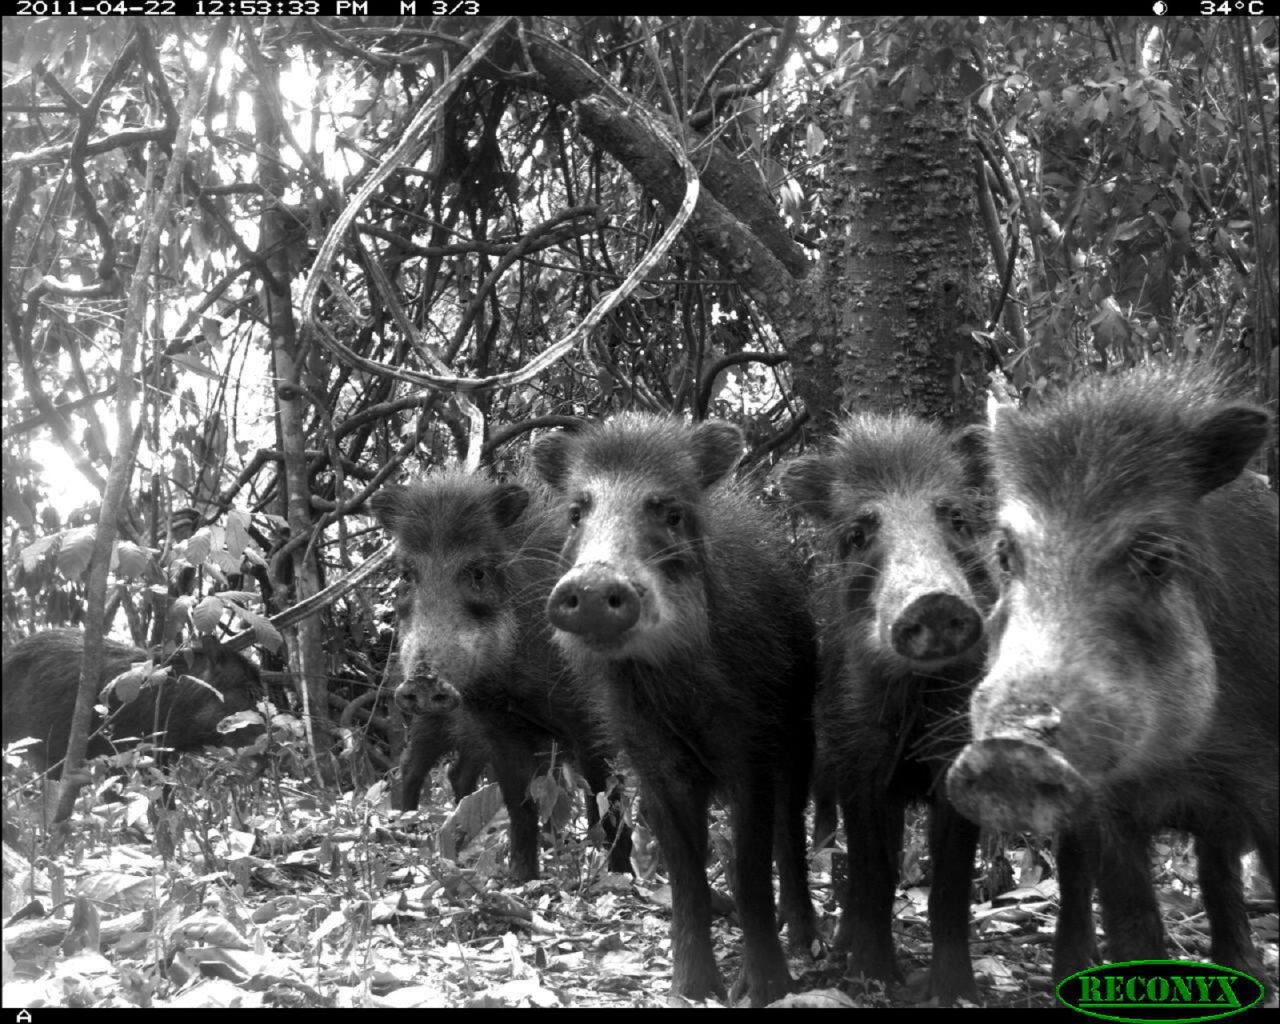 White-lipped peccaries are also found in the region and are considered vulnerable by the IUCN.  